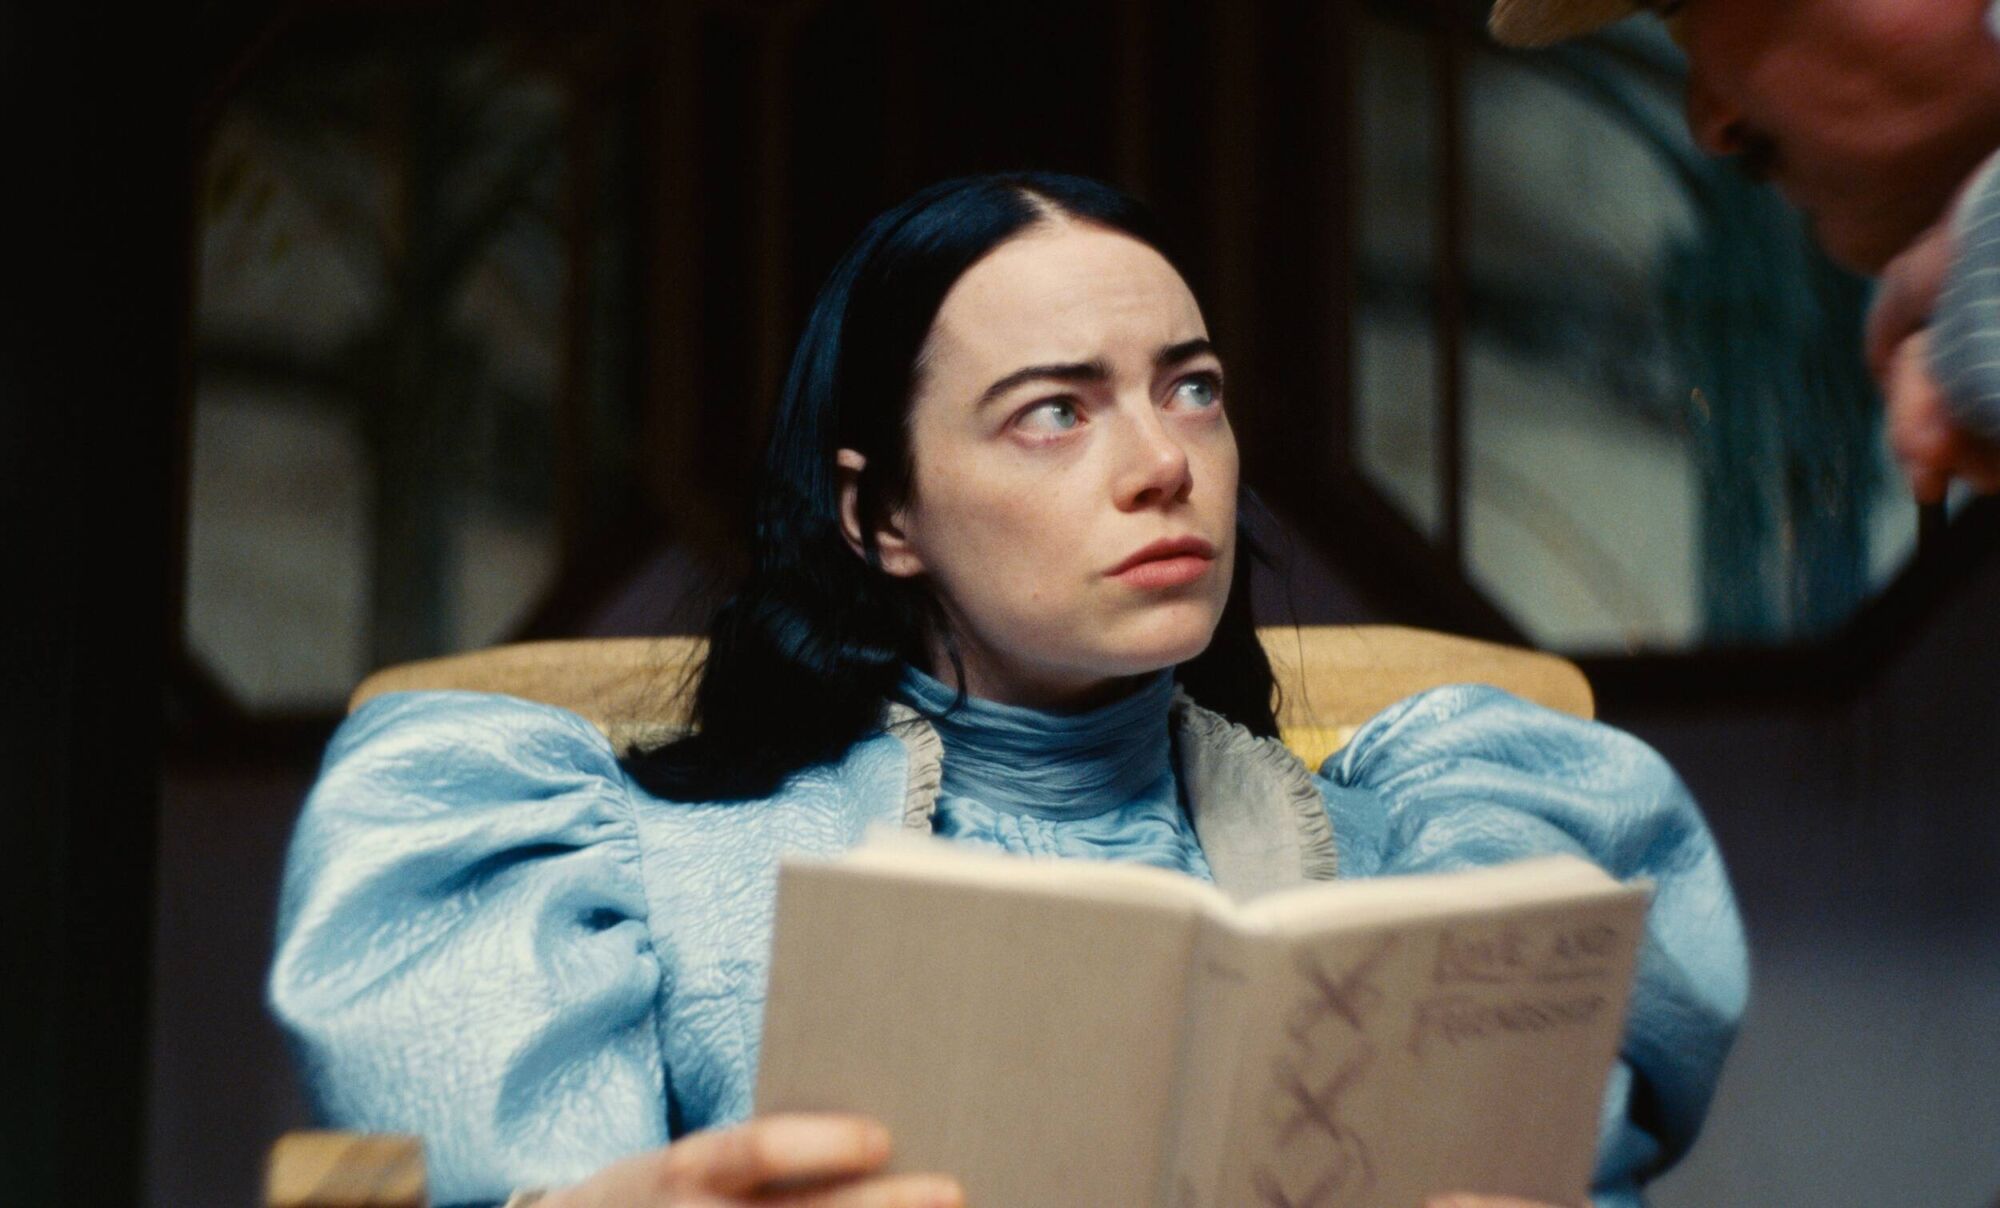 Emma Stone in the movie Poor Things looking up from a book